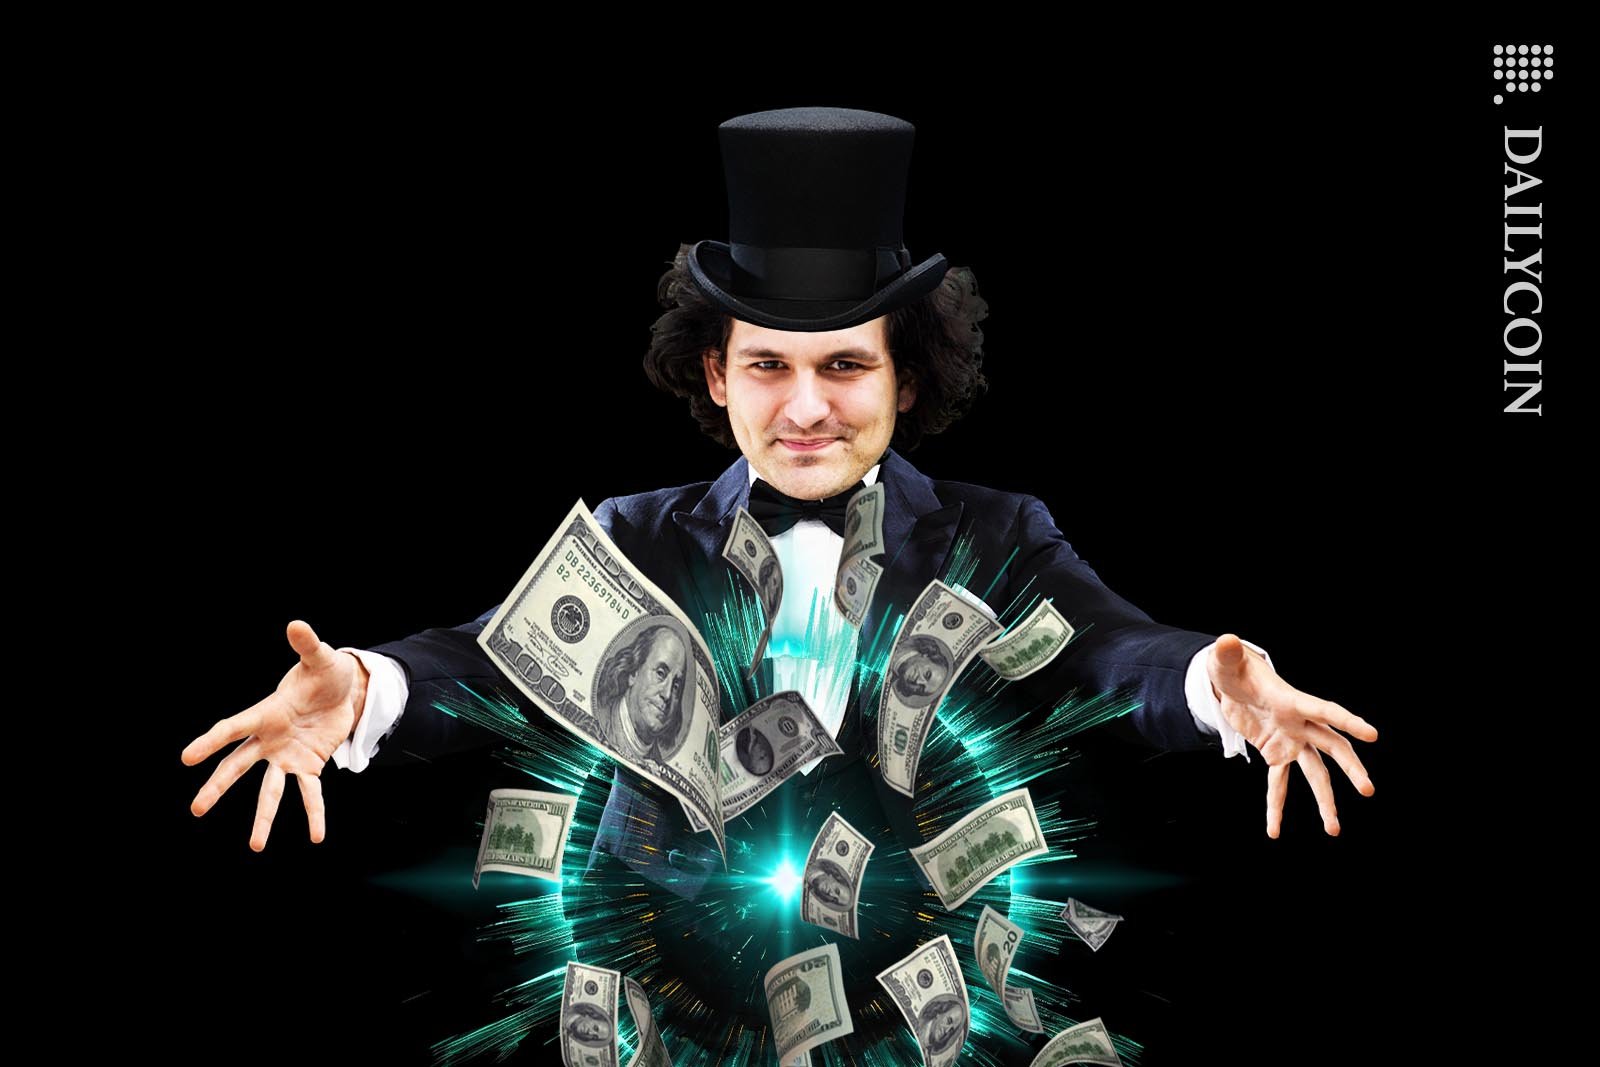 Sam Bankman-Fried dressed as a Magician, making money disappeared.